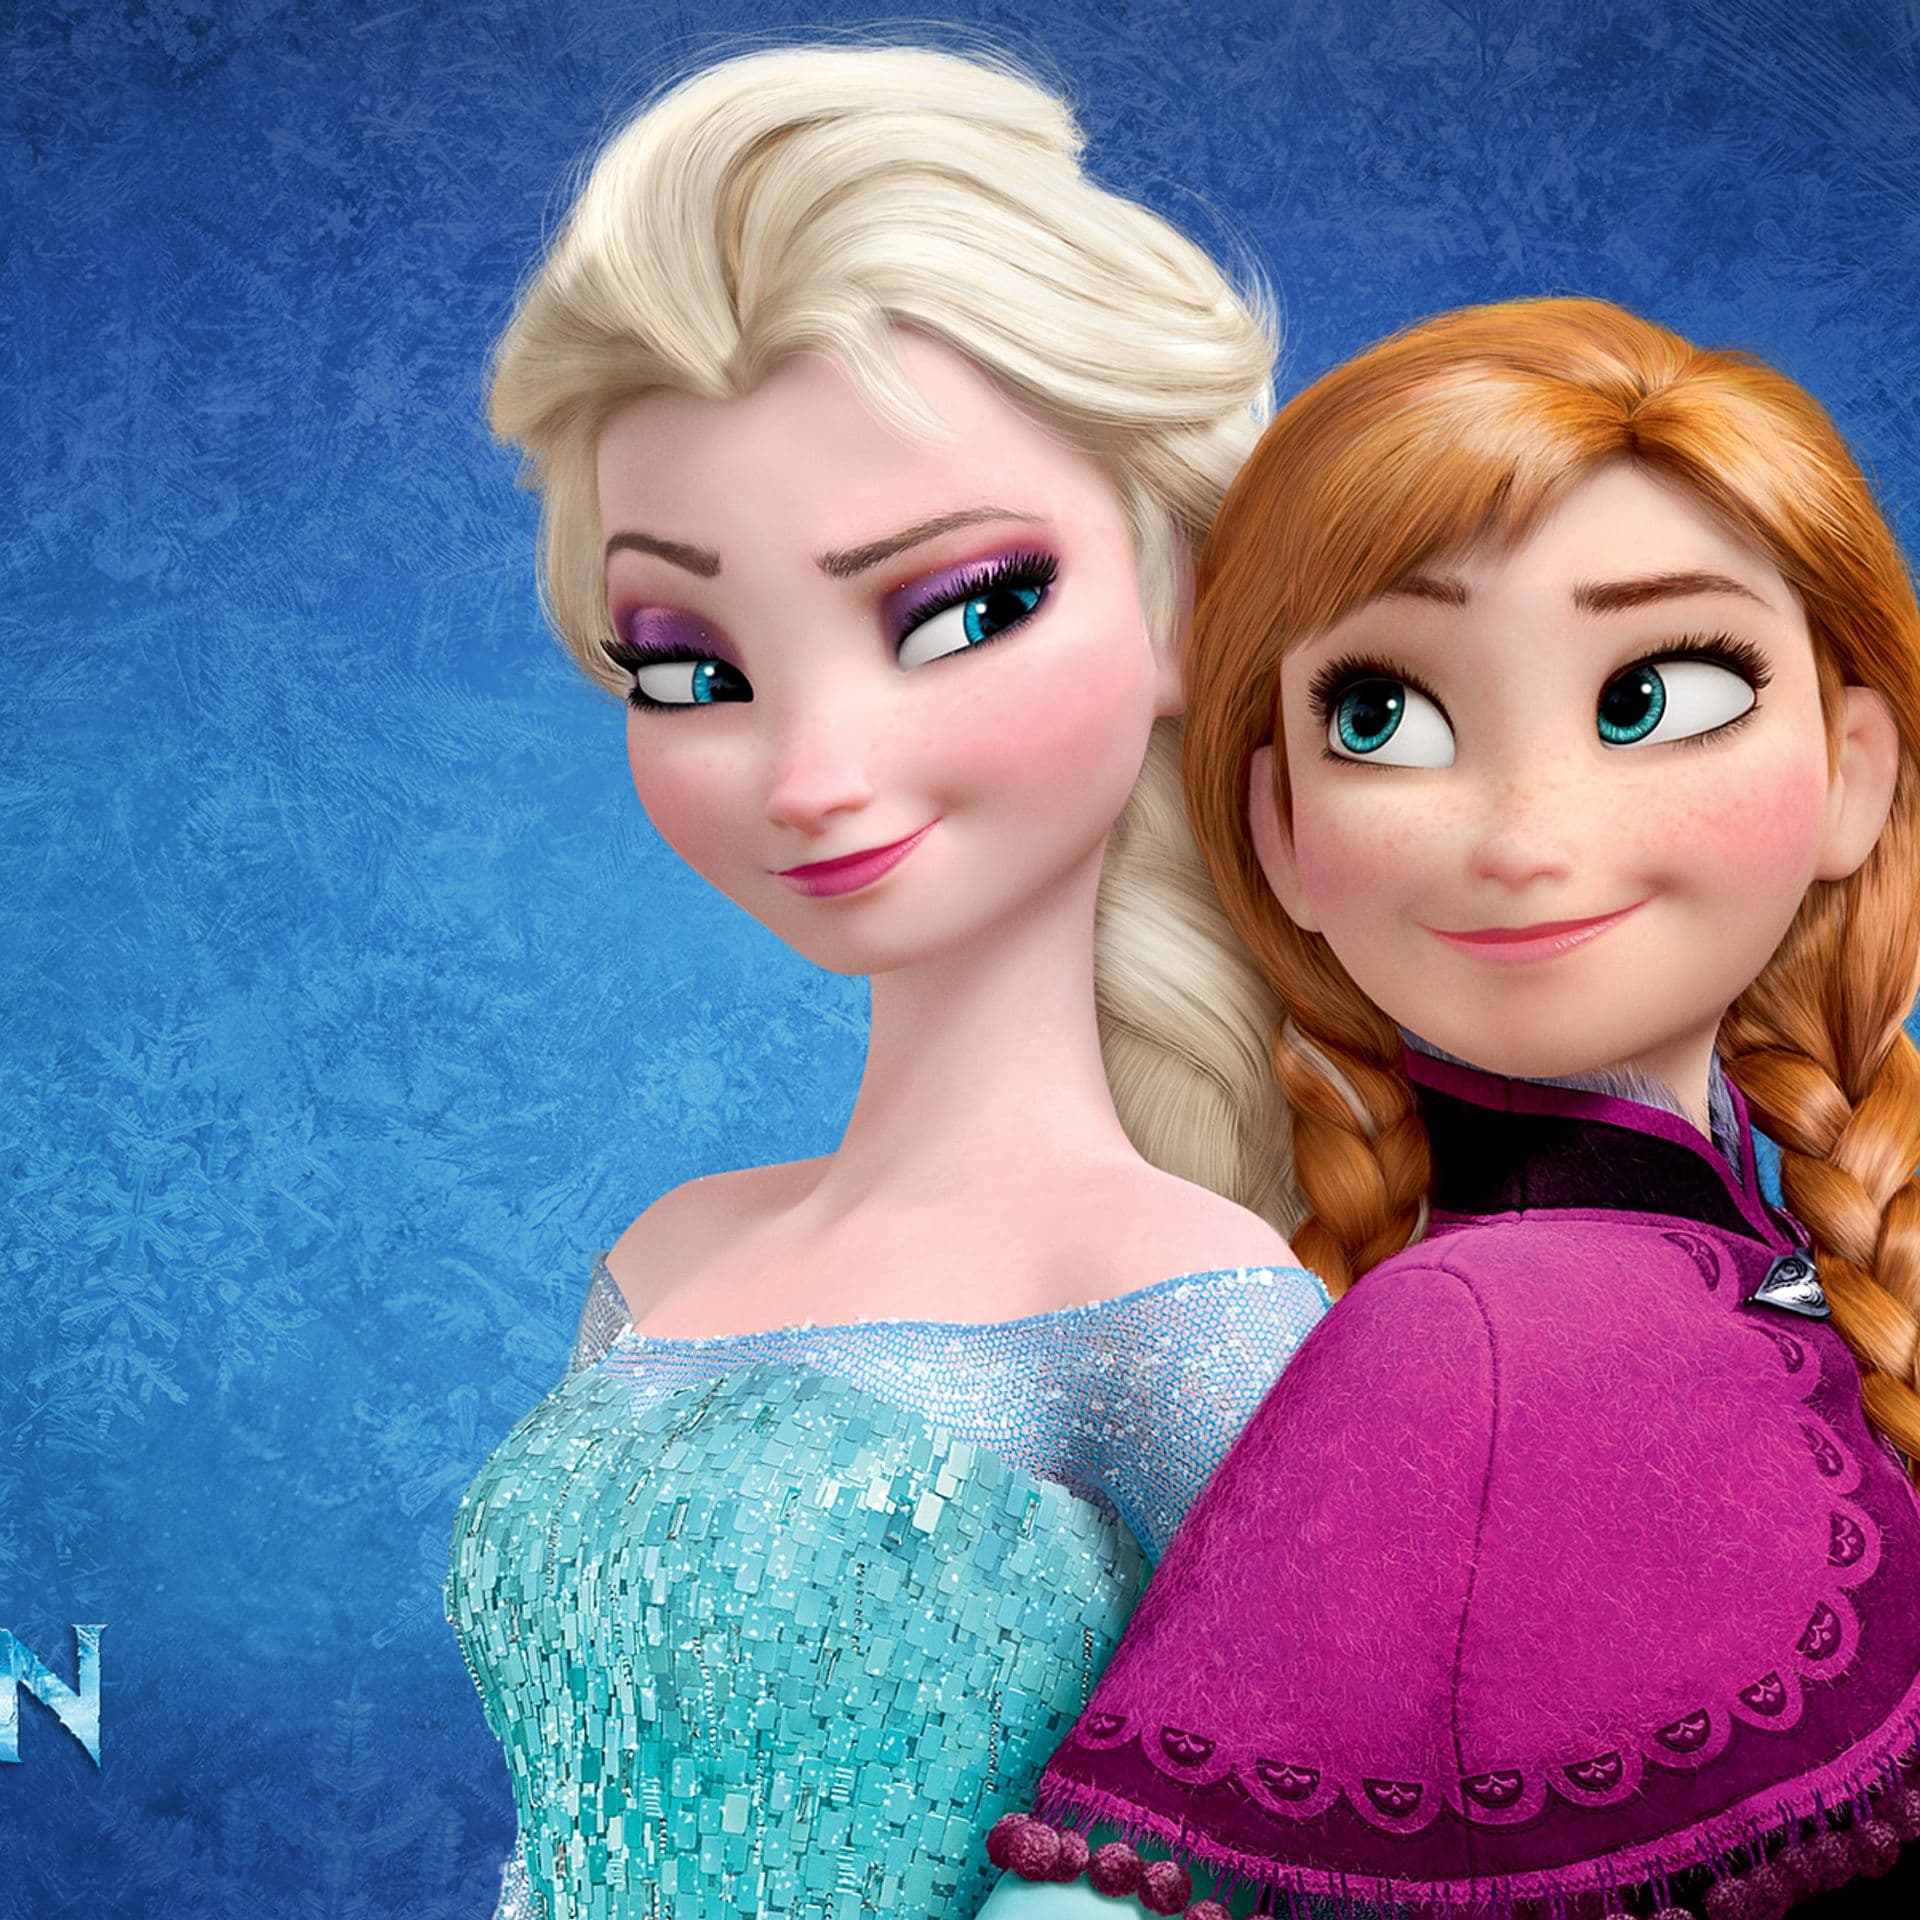 Frozen magic unveiled: How Disney rewrote the princess rulebook
